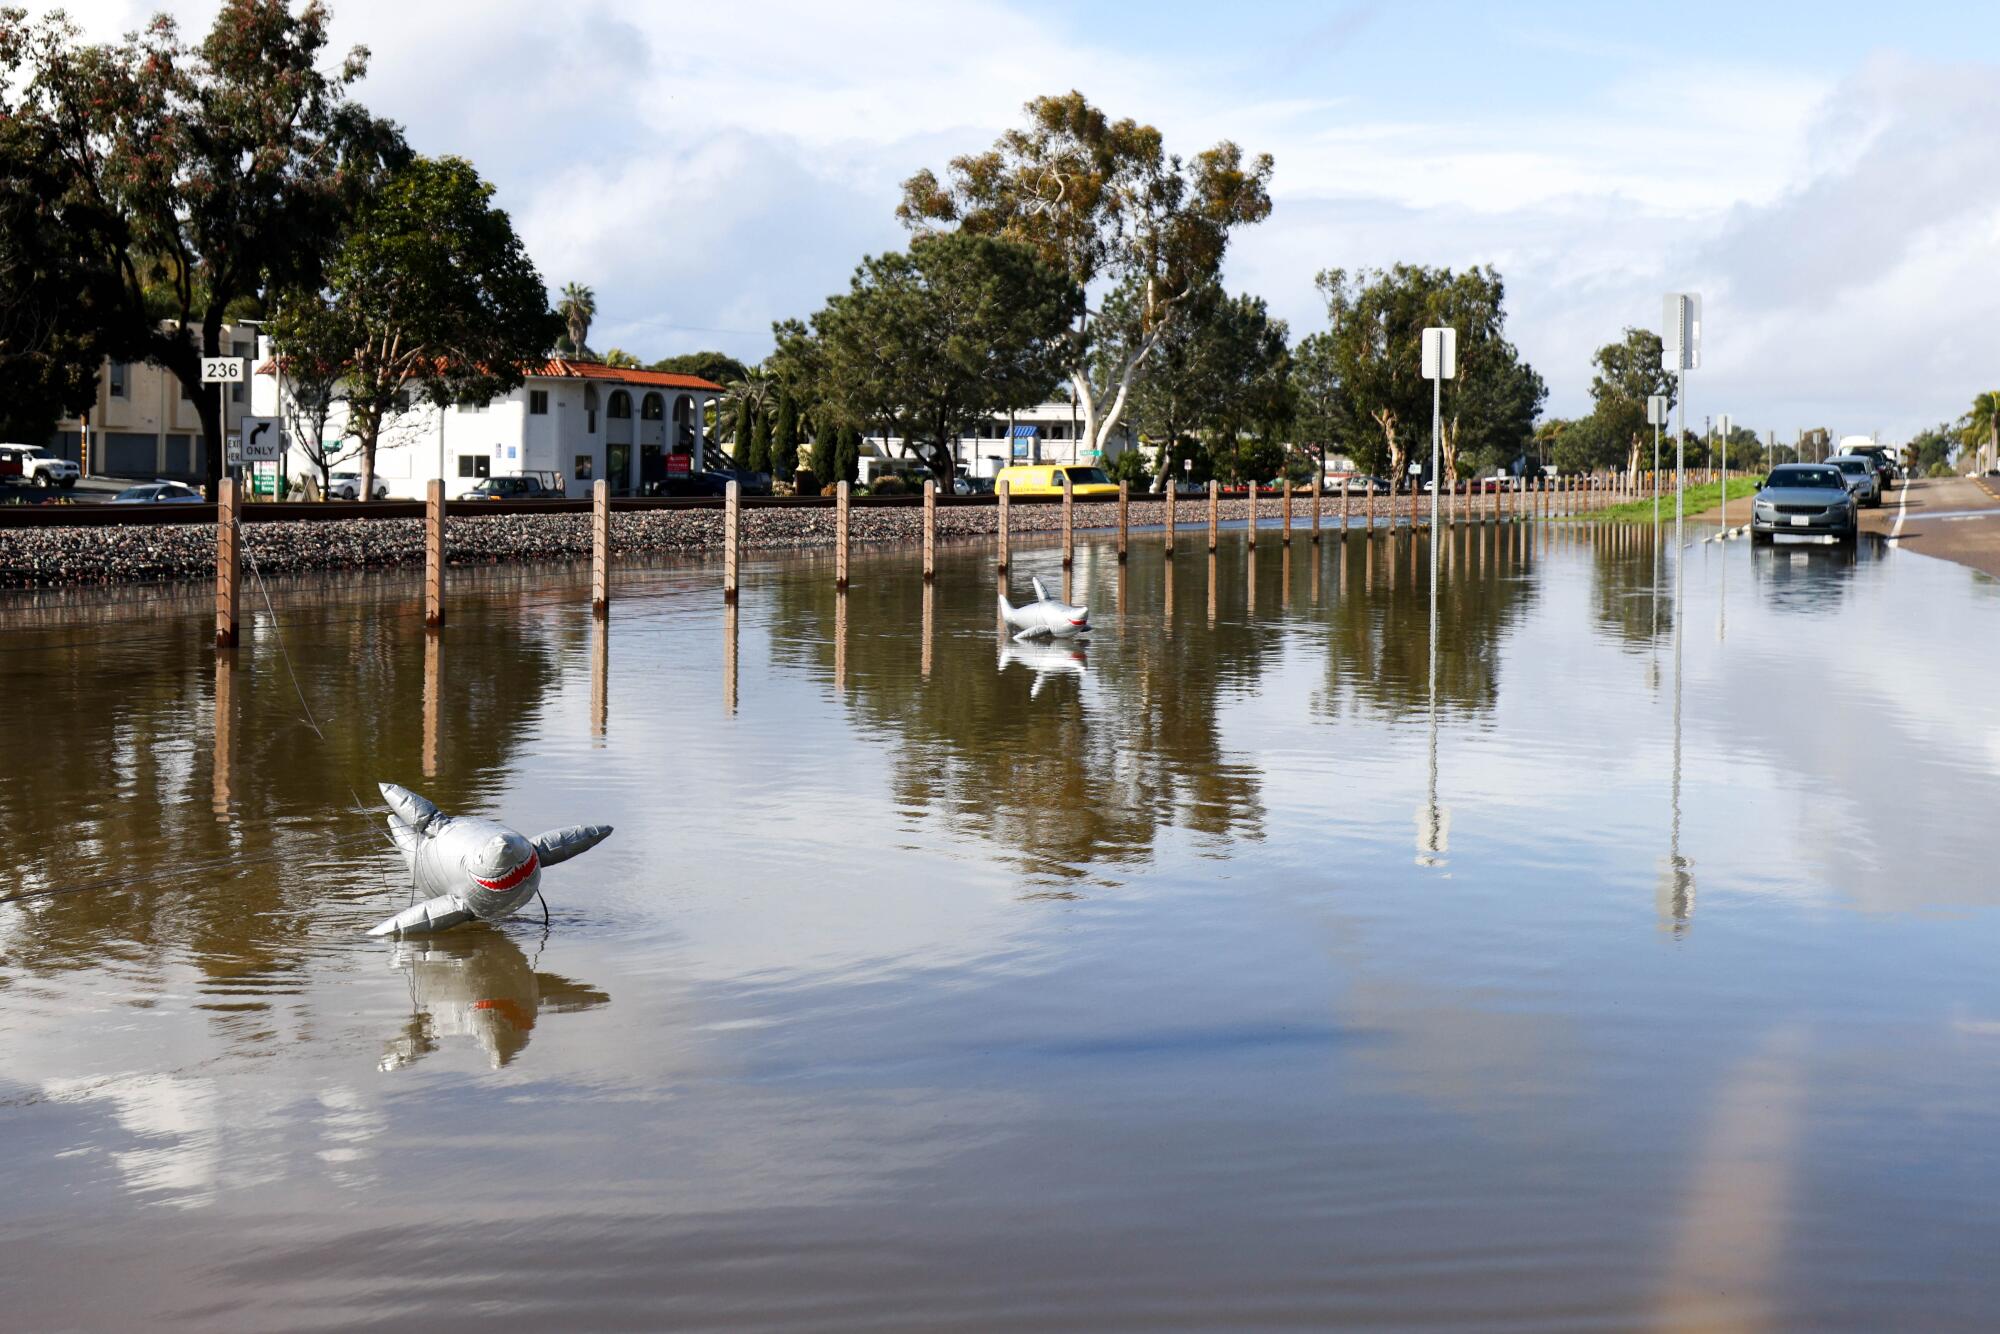 Inflatable sharks are seen floating in flood water along North Vulcan Avenue Tuesday in Encinitas.